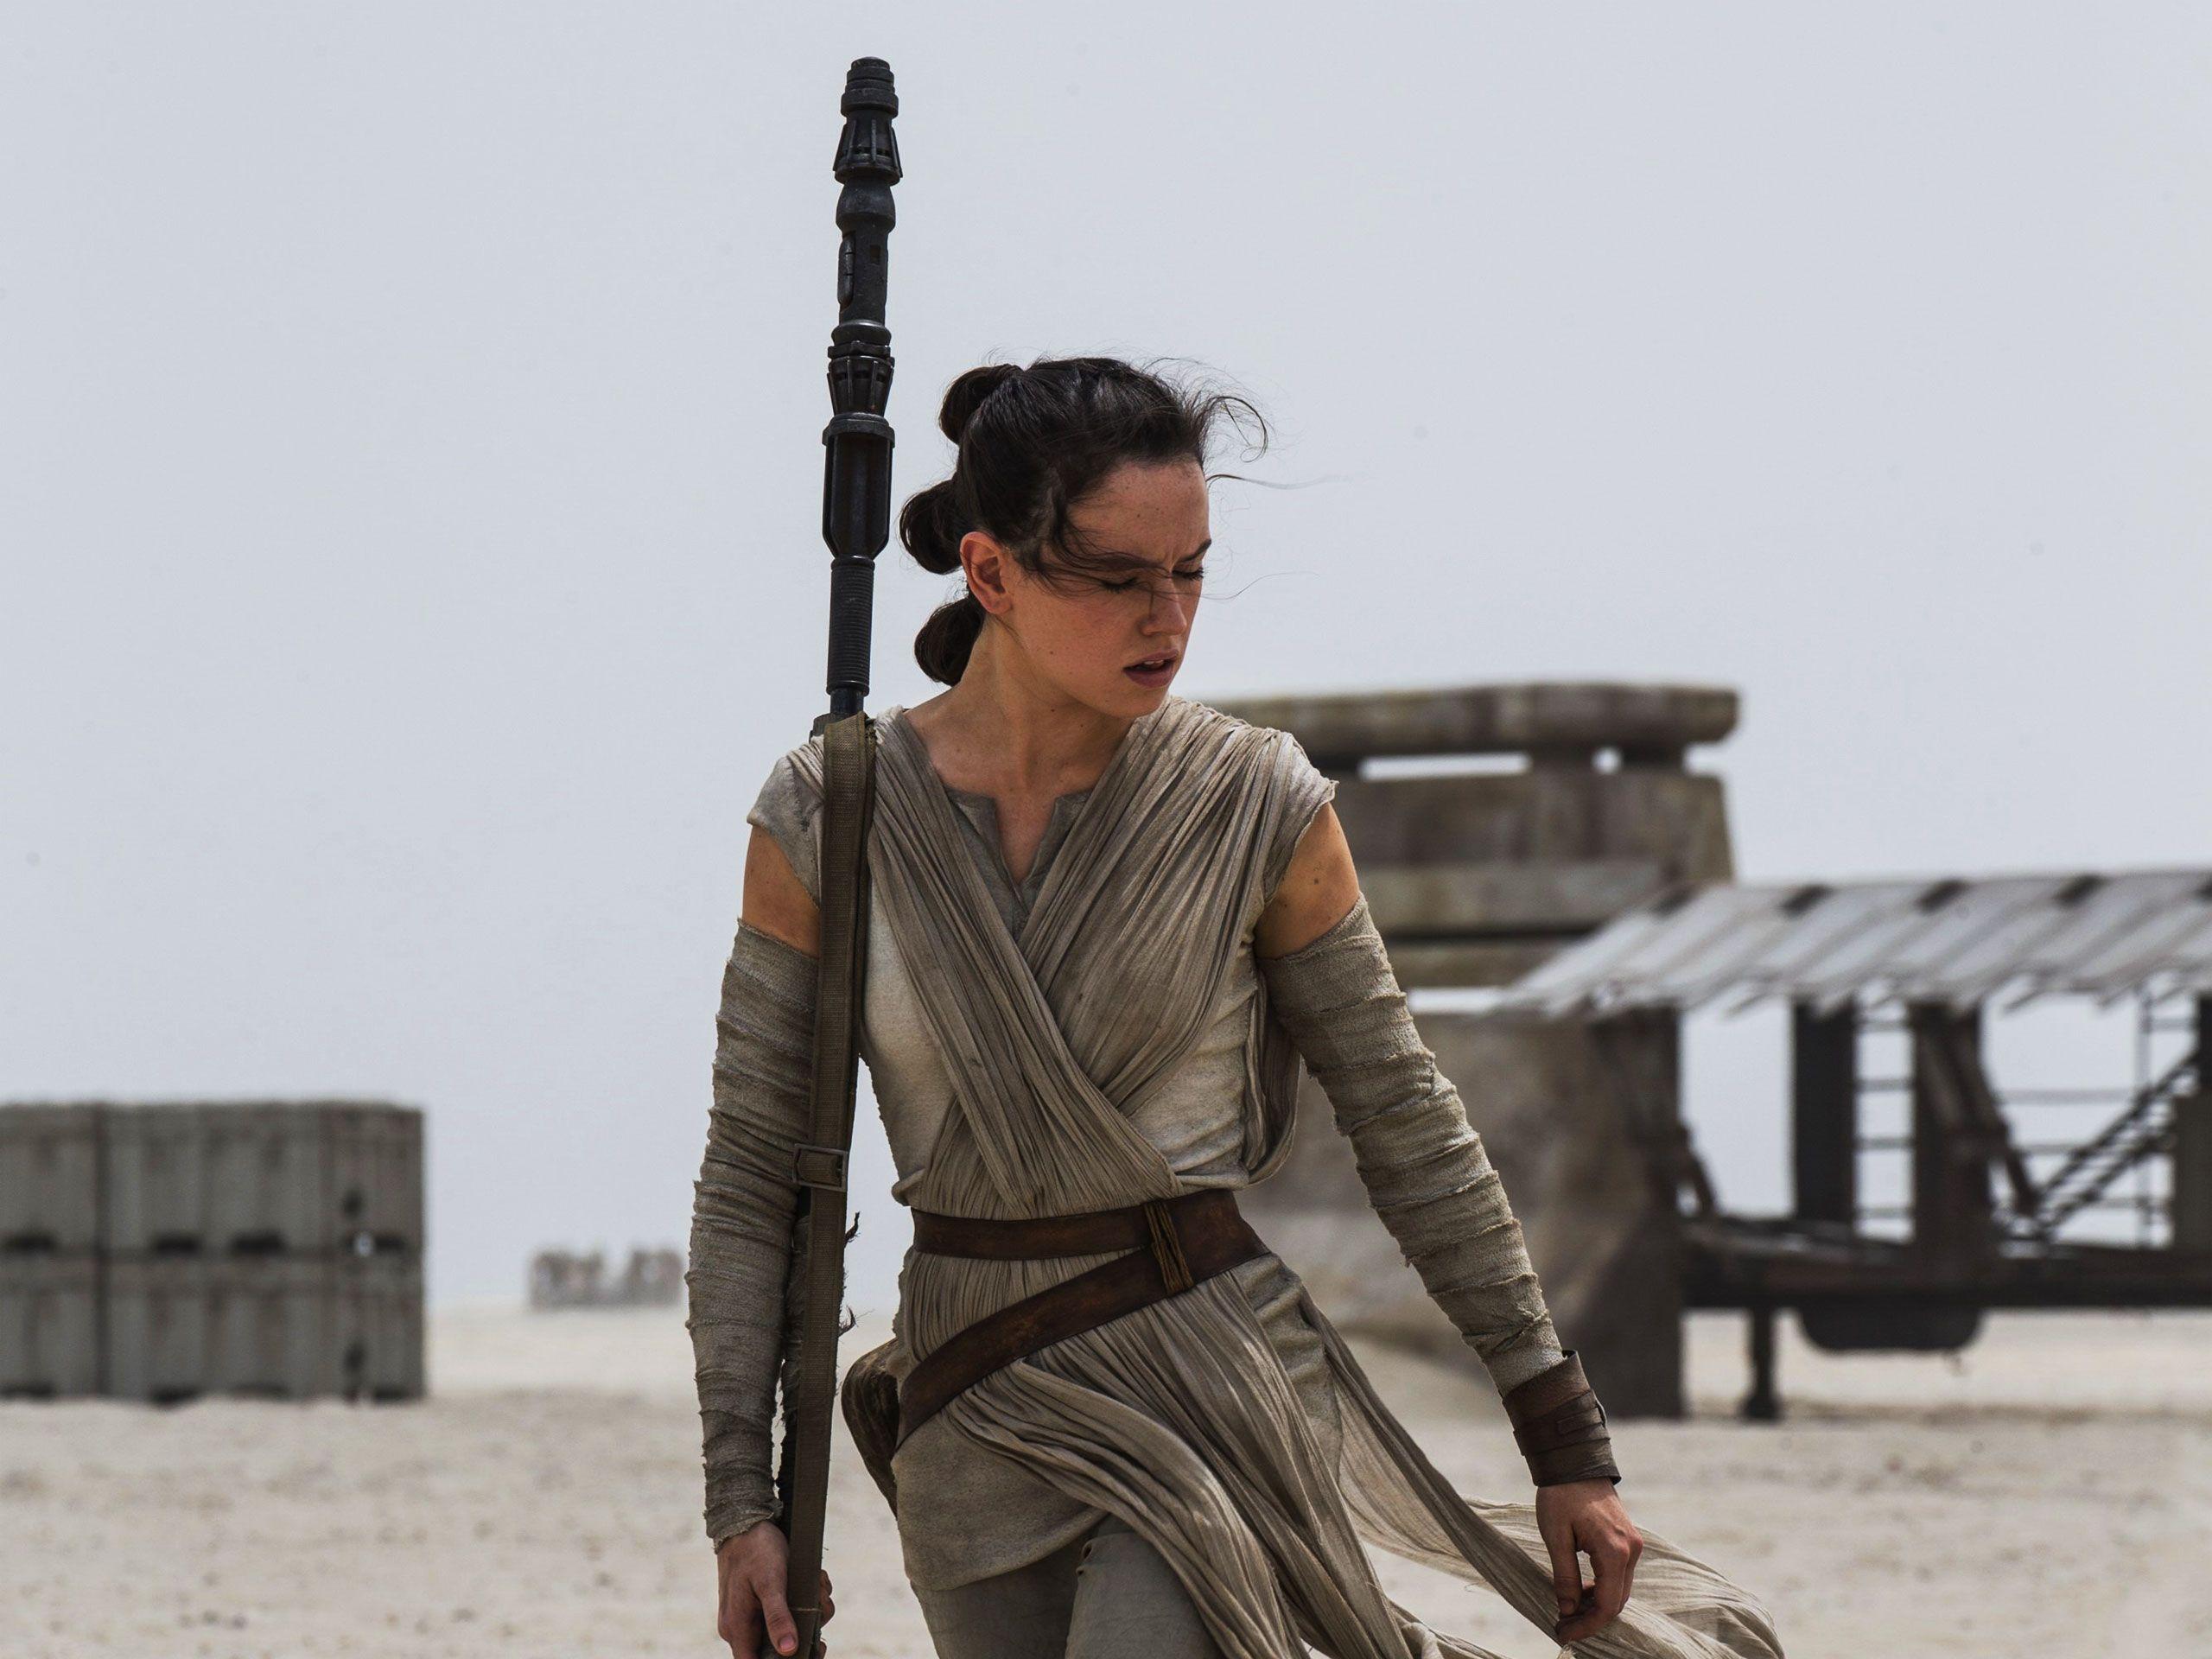 Rey from Star Wars 7: The Force Awakens